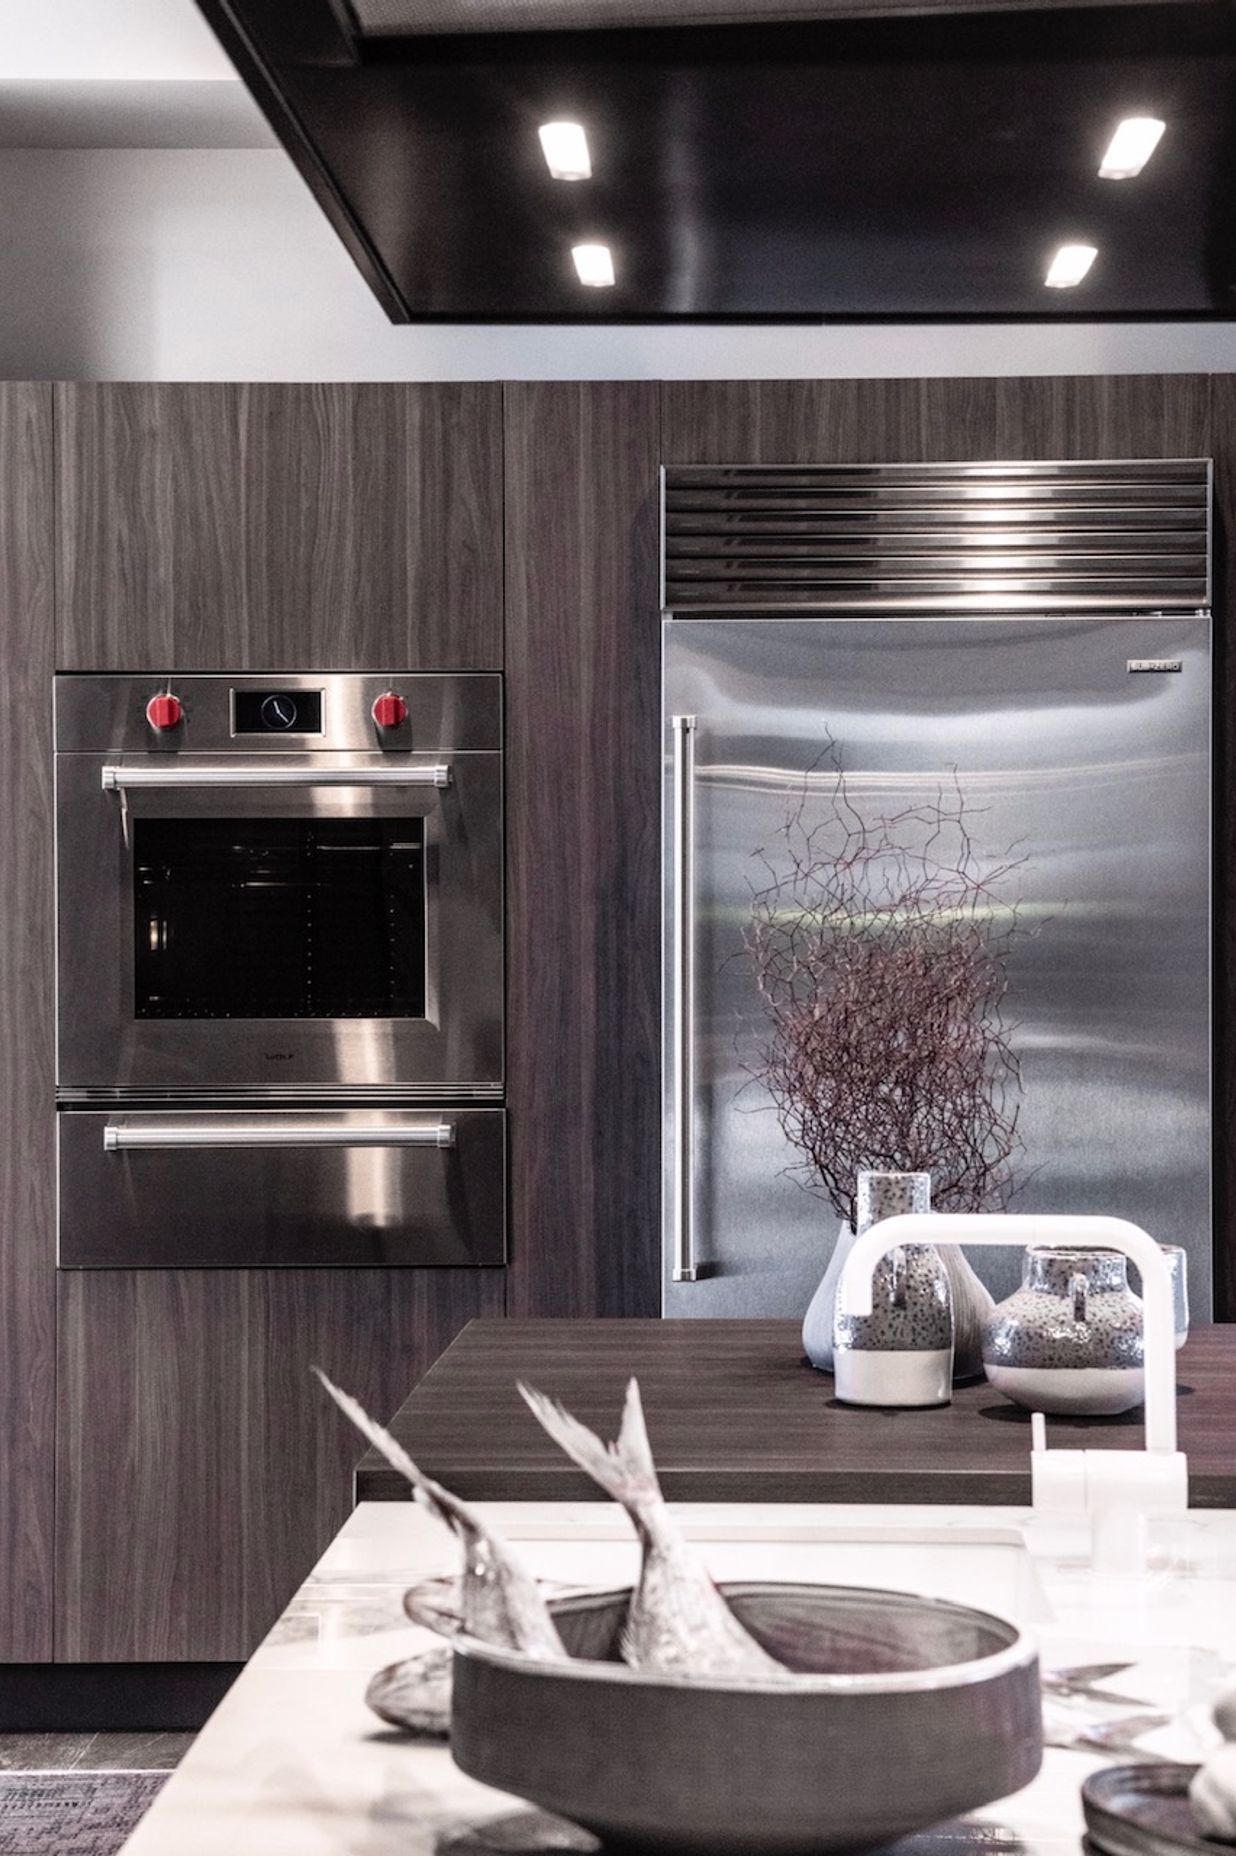 A Qasair custom rangehood hangs over a classic marble island. Sub-Zero and Wolf appliances are shown in this display by Unico.